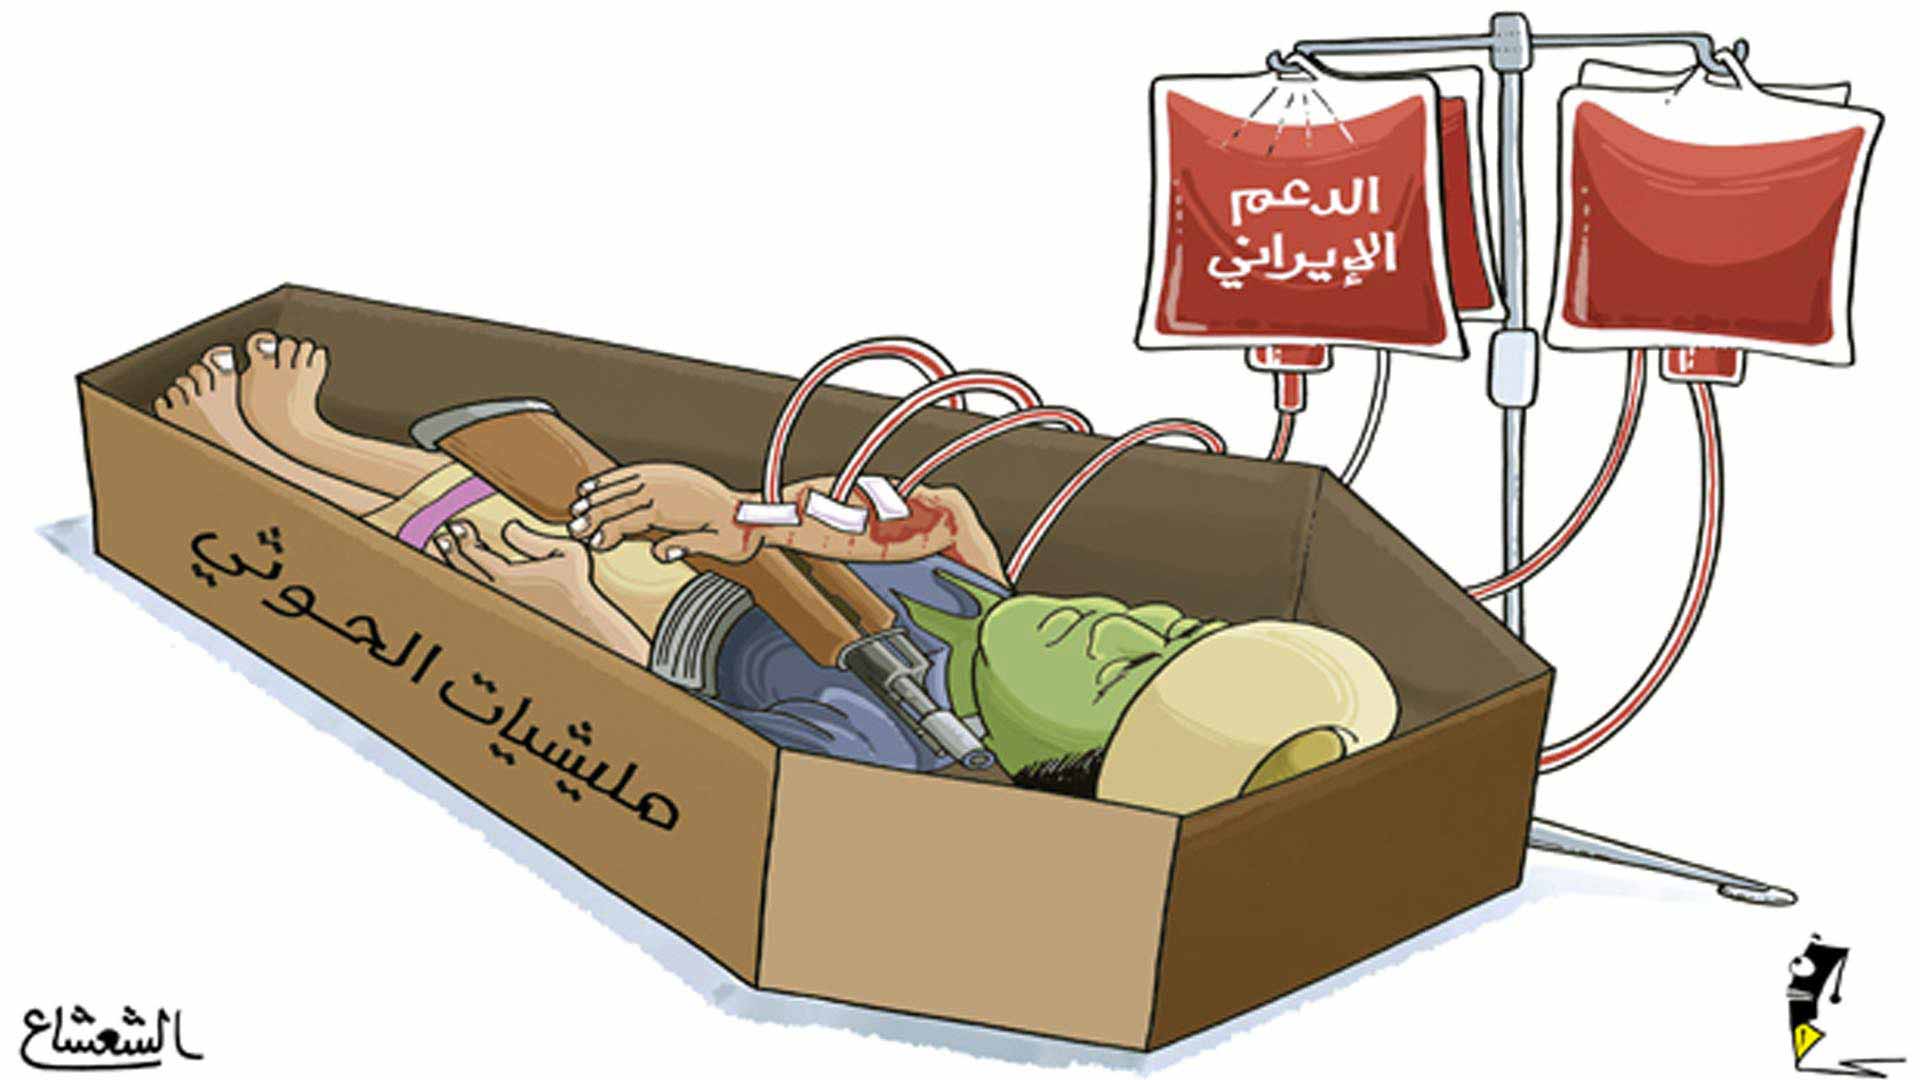 caricature_in_the_arab_countries_1.jpg